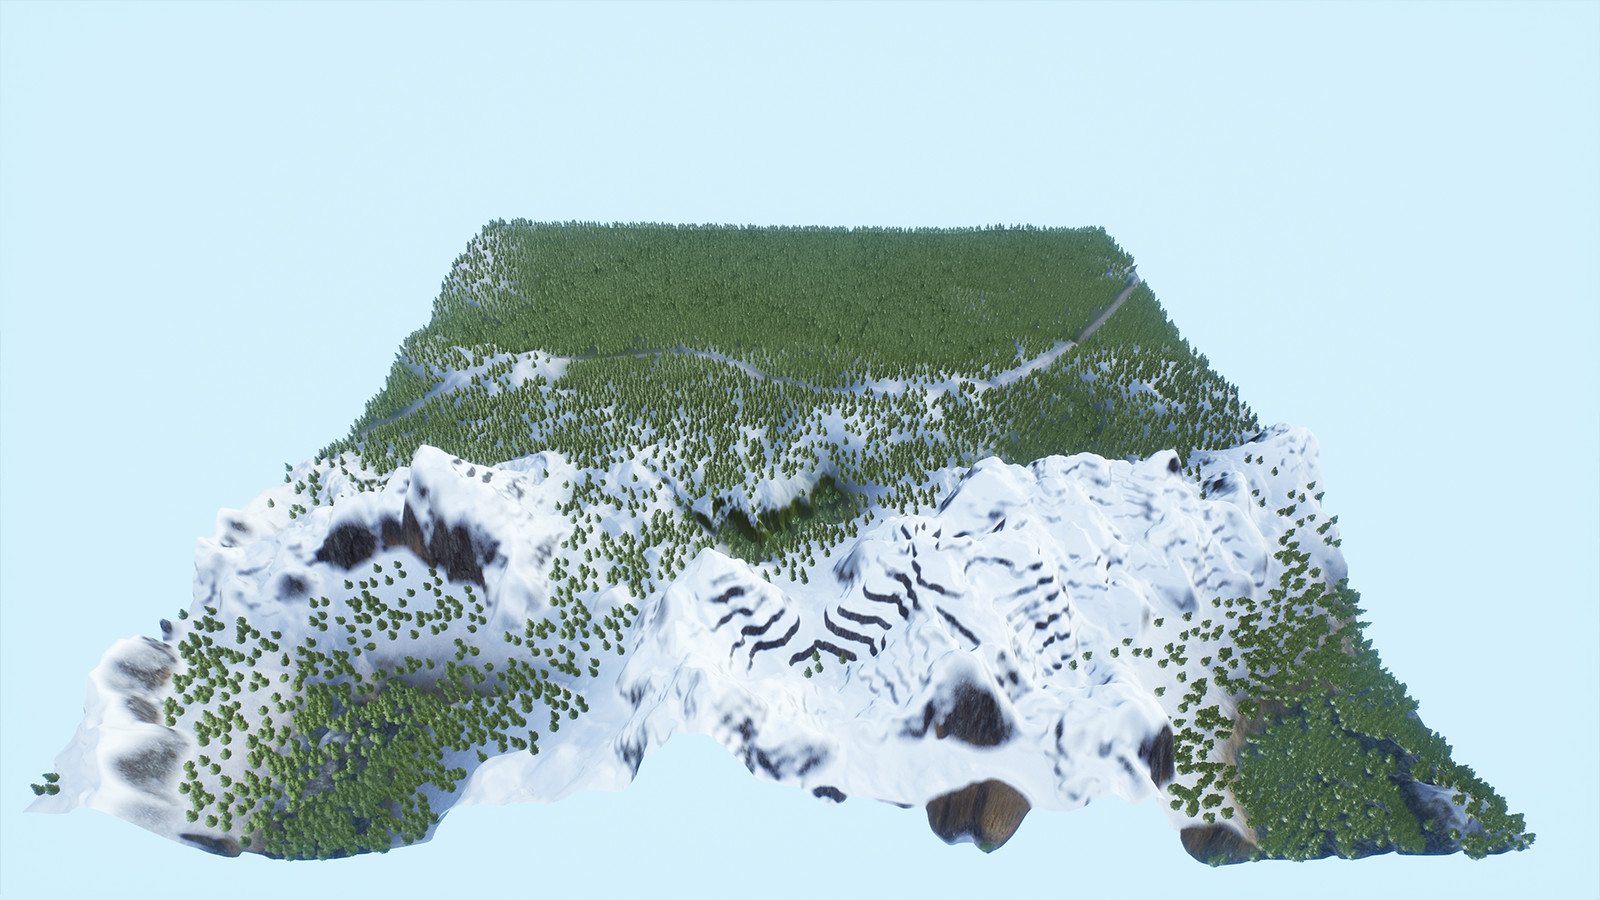 Overview of the third terrain.